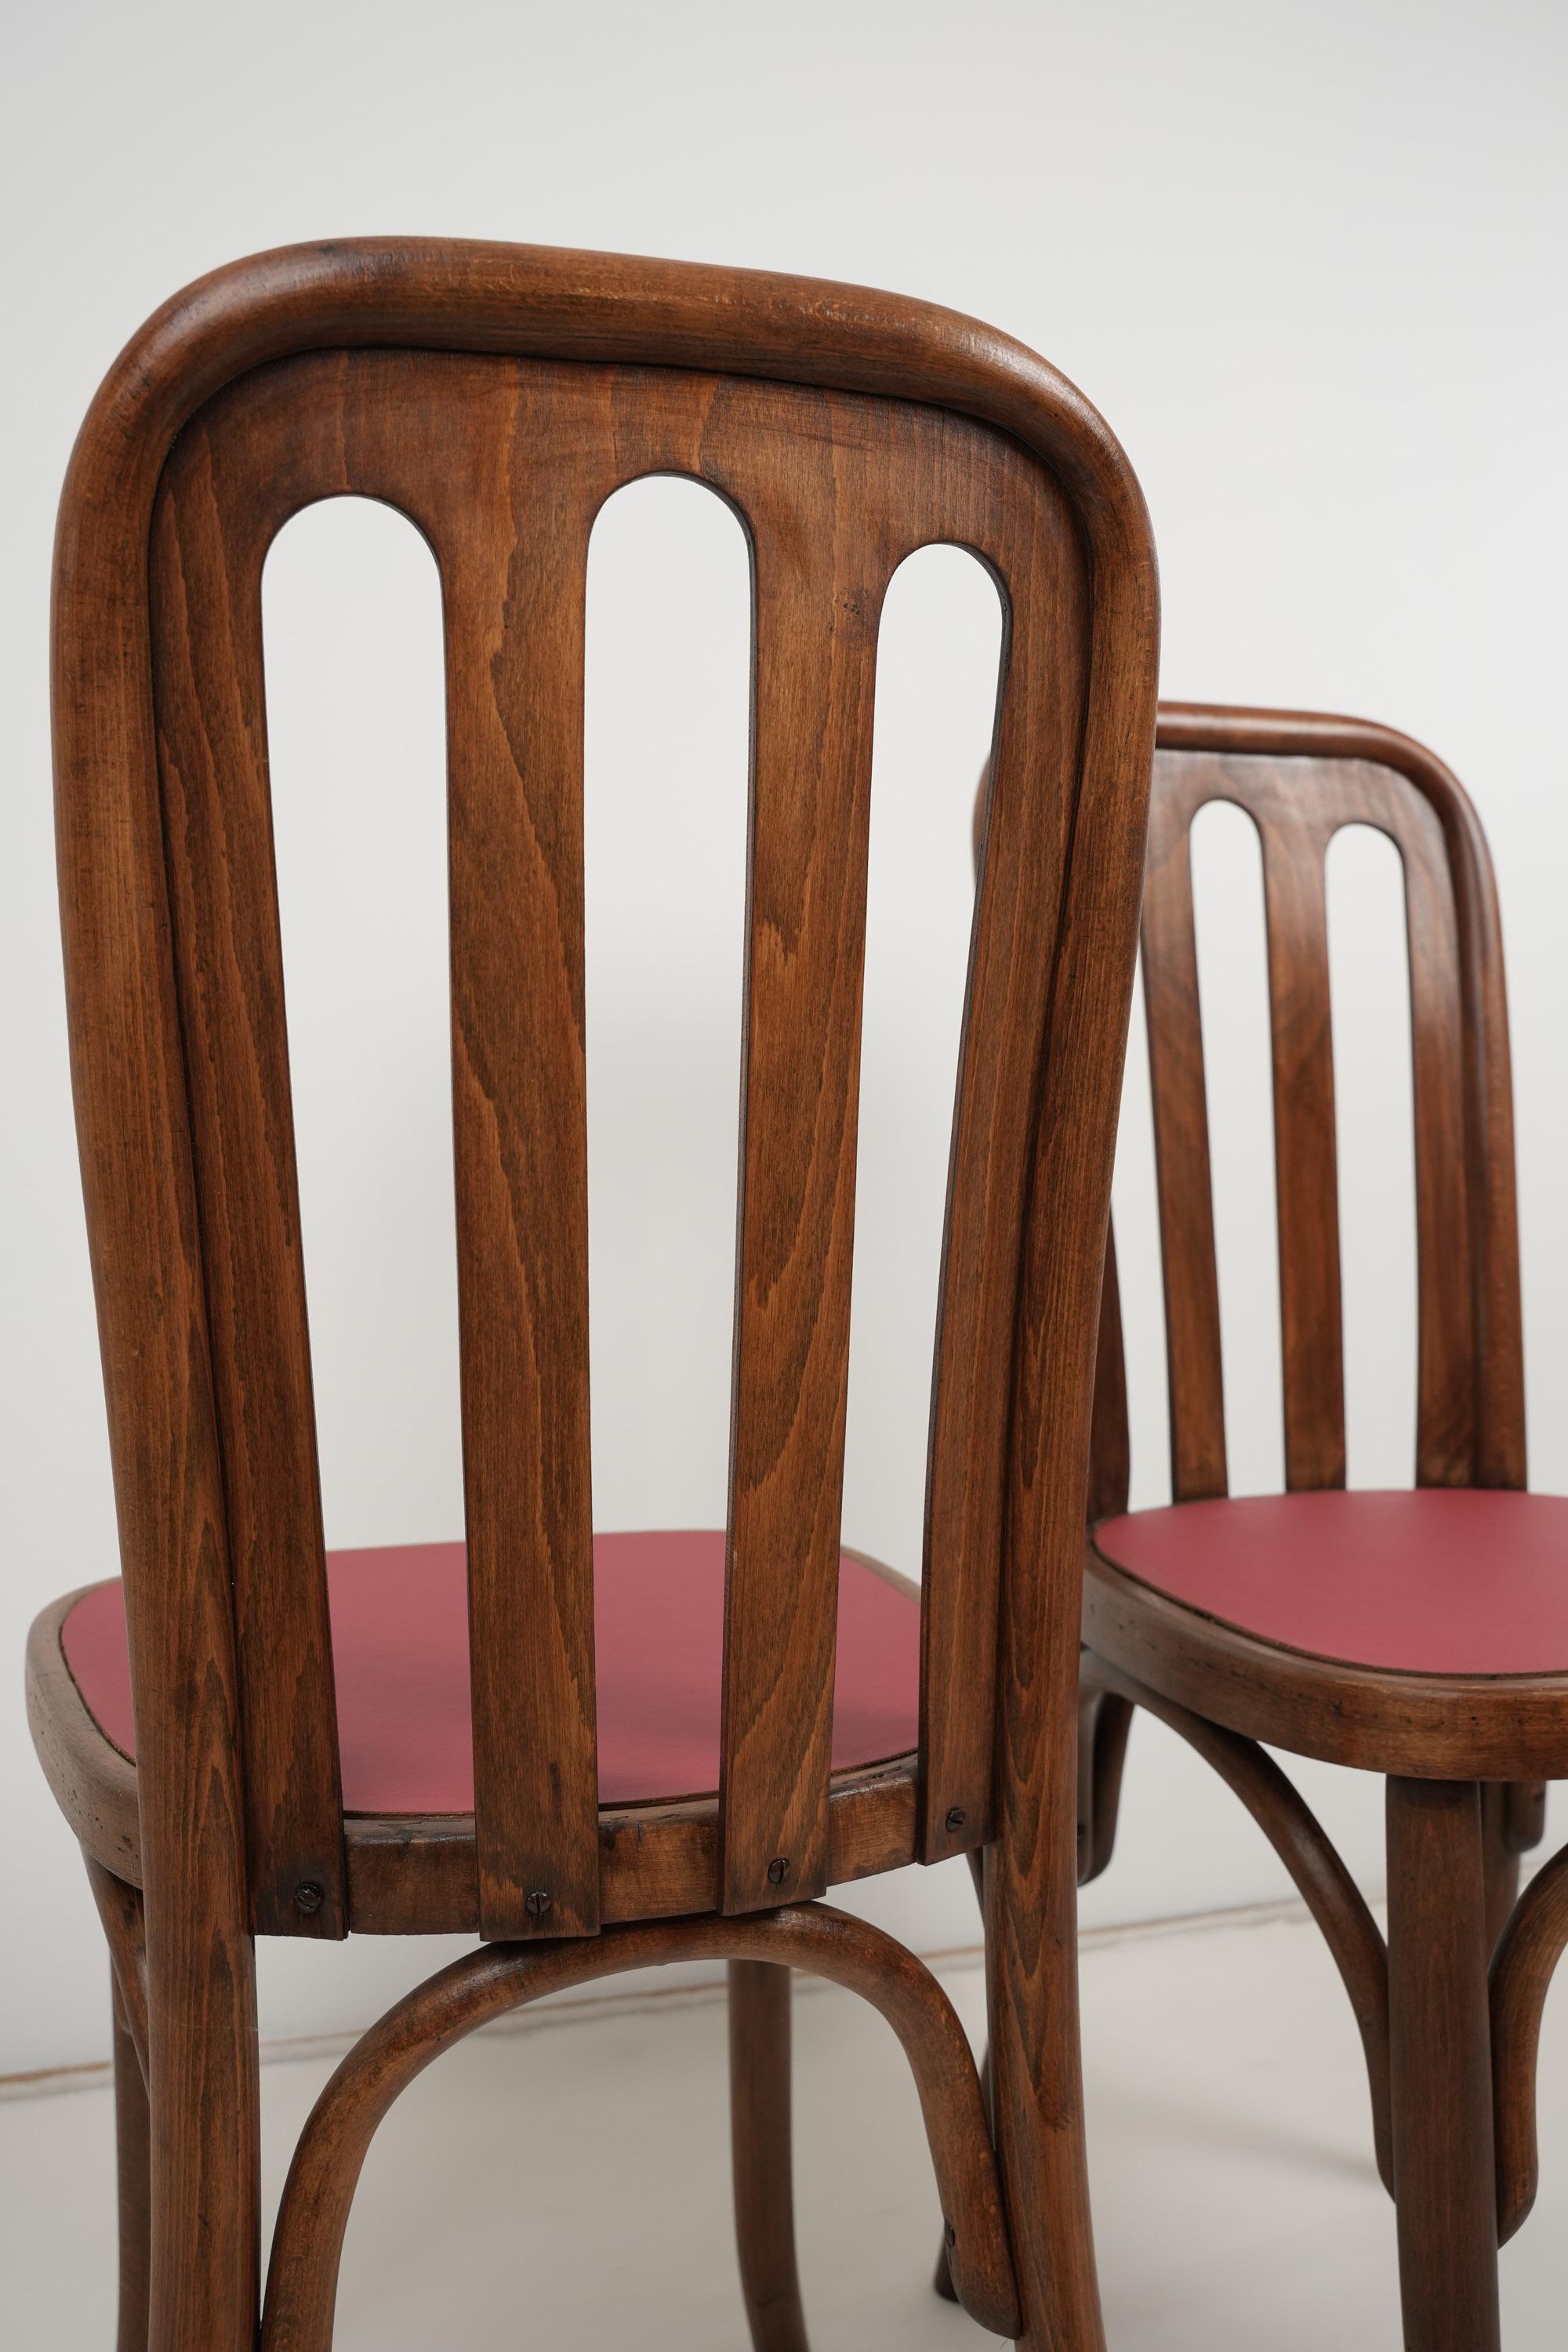 Early 20th Century Josef Hoffmann Chairs Set of Two Austria 1905 For Sale